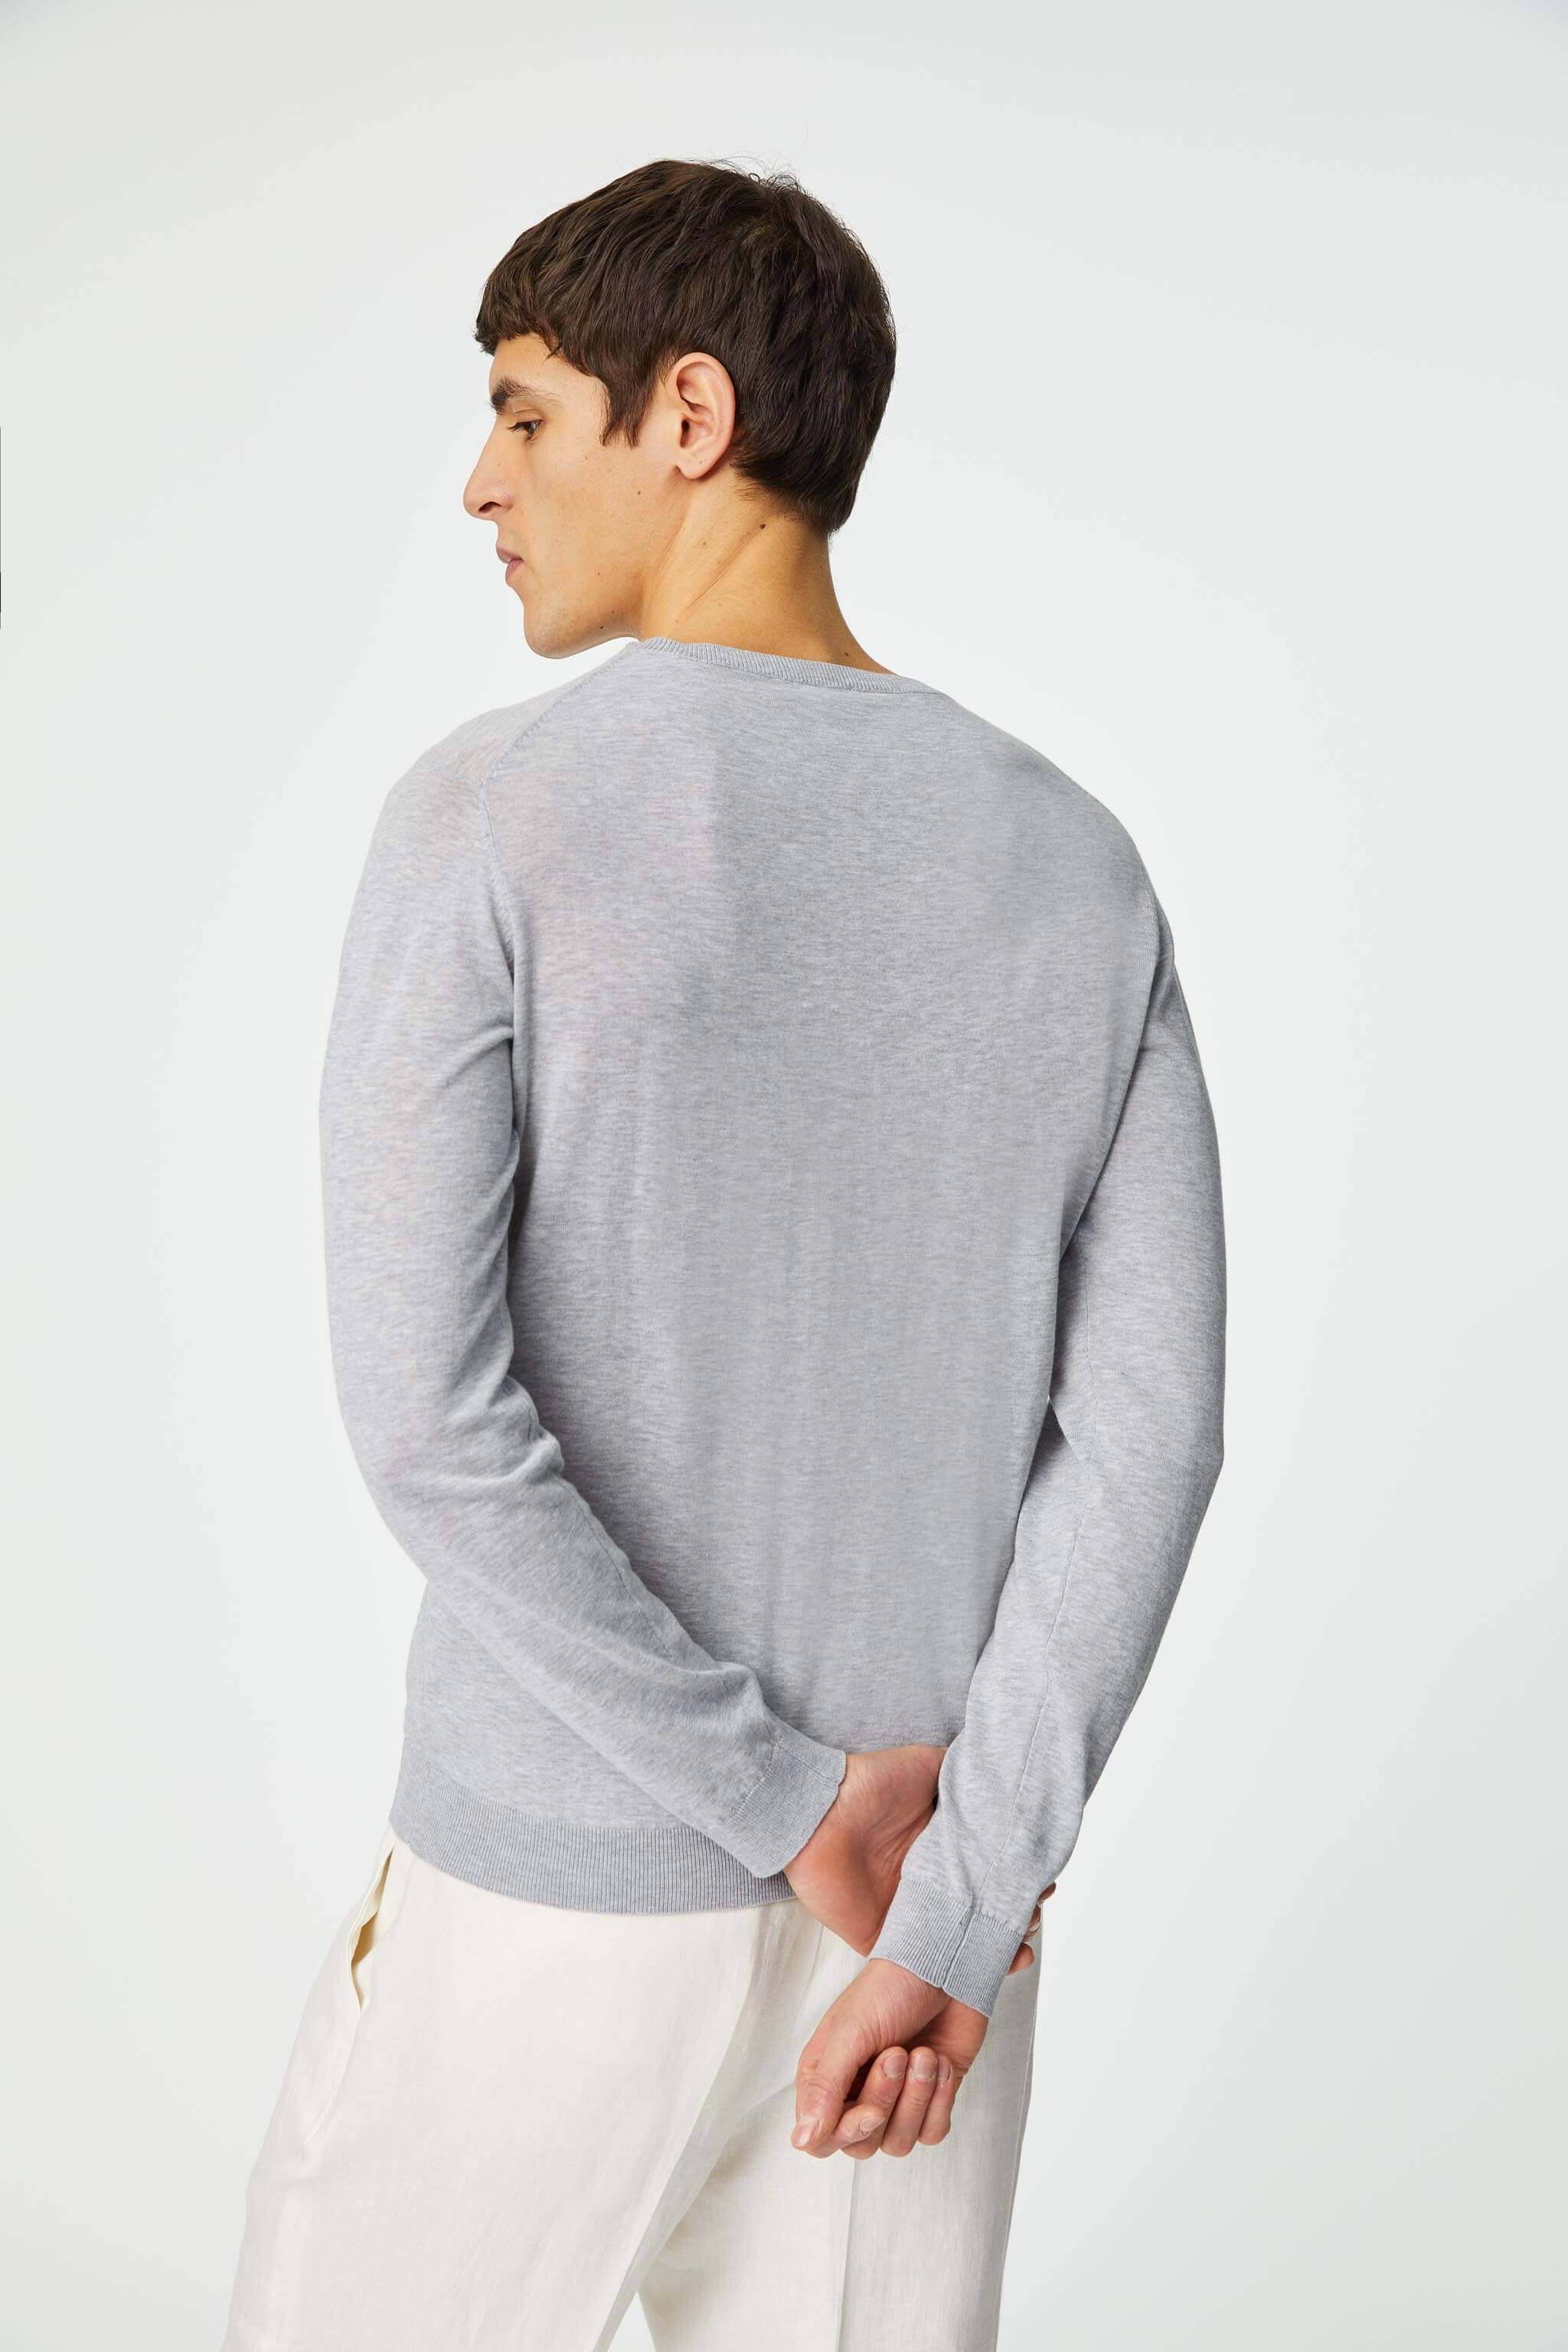 Long-sleeve cotton T-shirt in soft gray